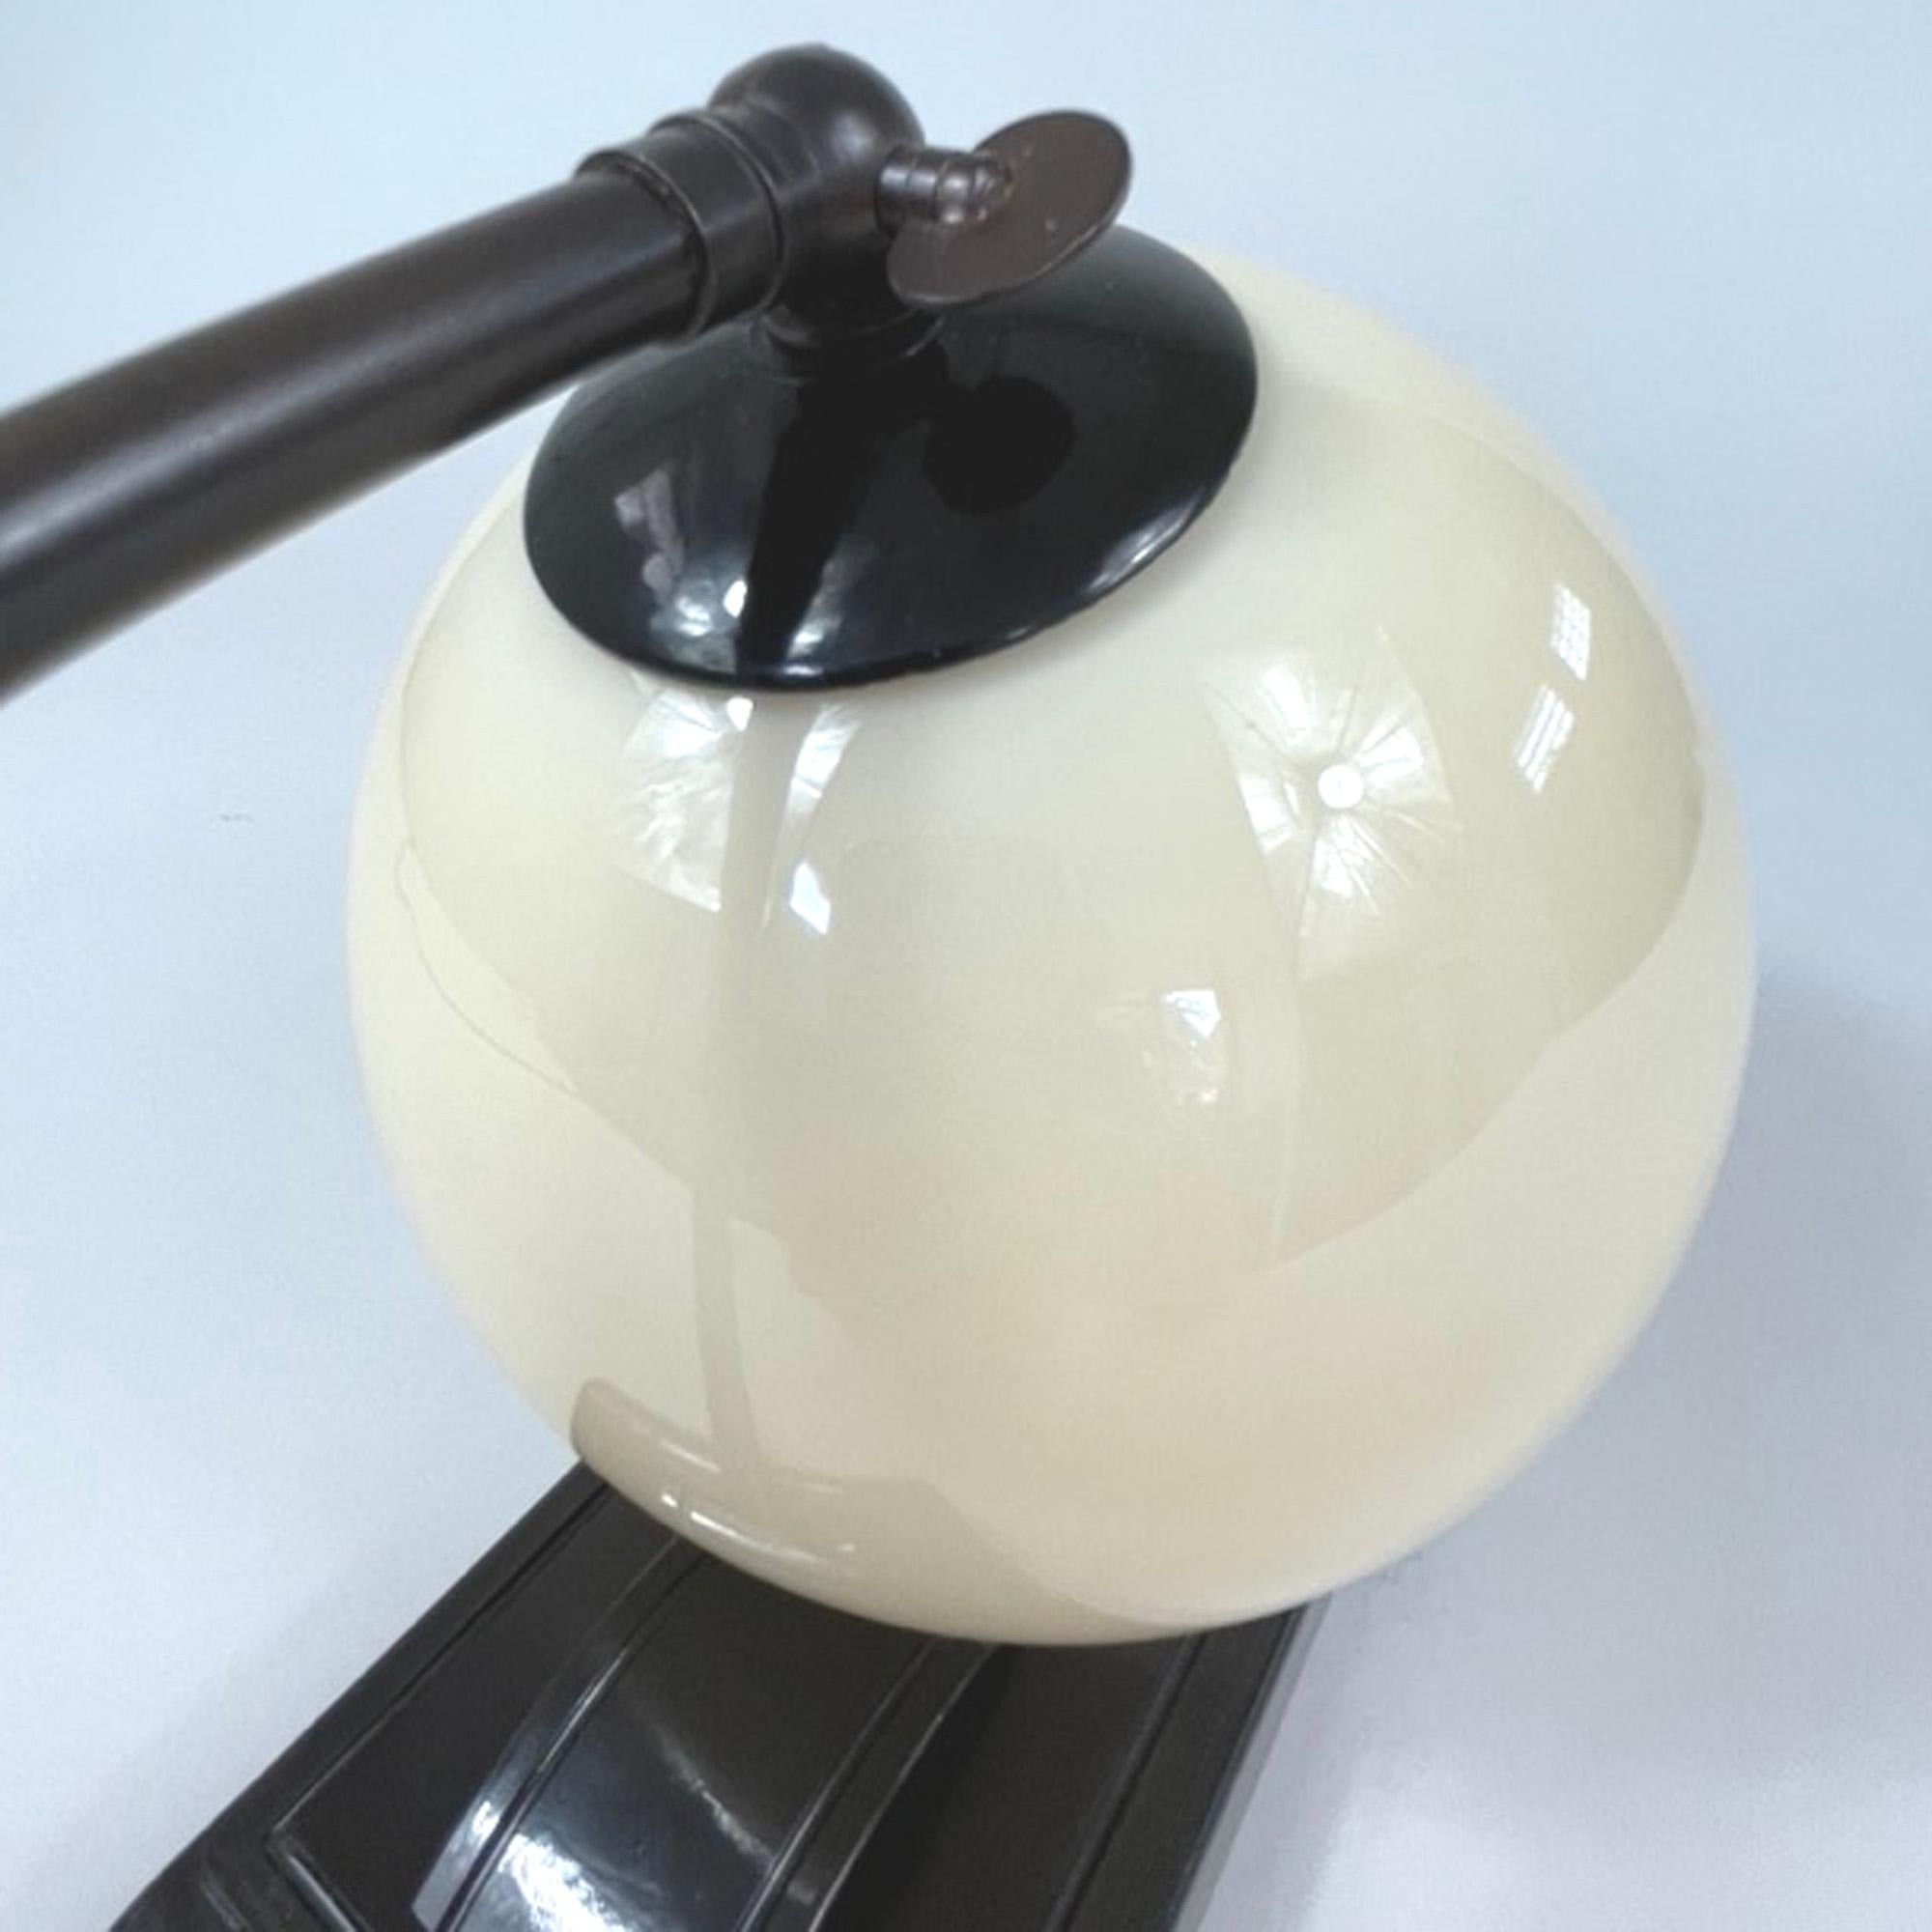 Art Deco Streamline Design Bakelite and Opaline Table Lamp, 1920s to 1930s For Sale 6